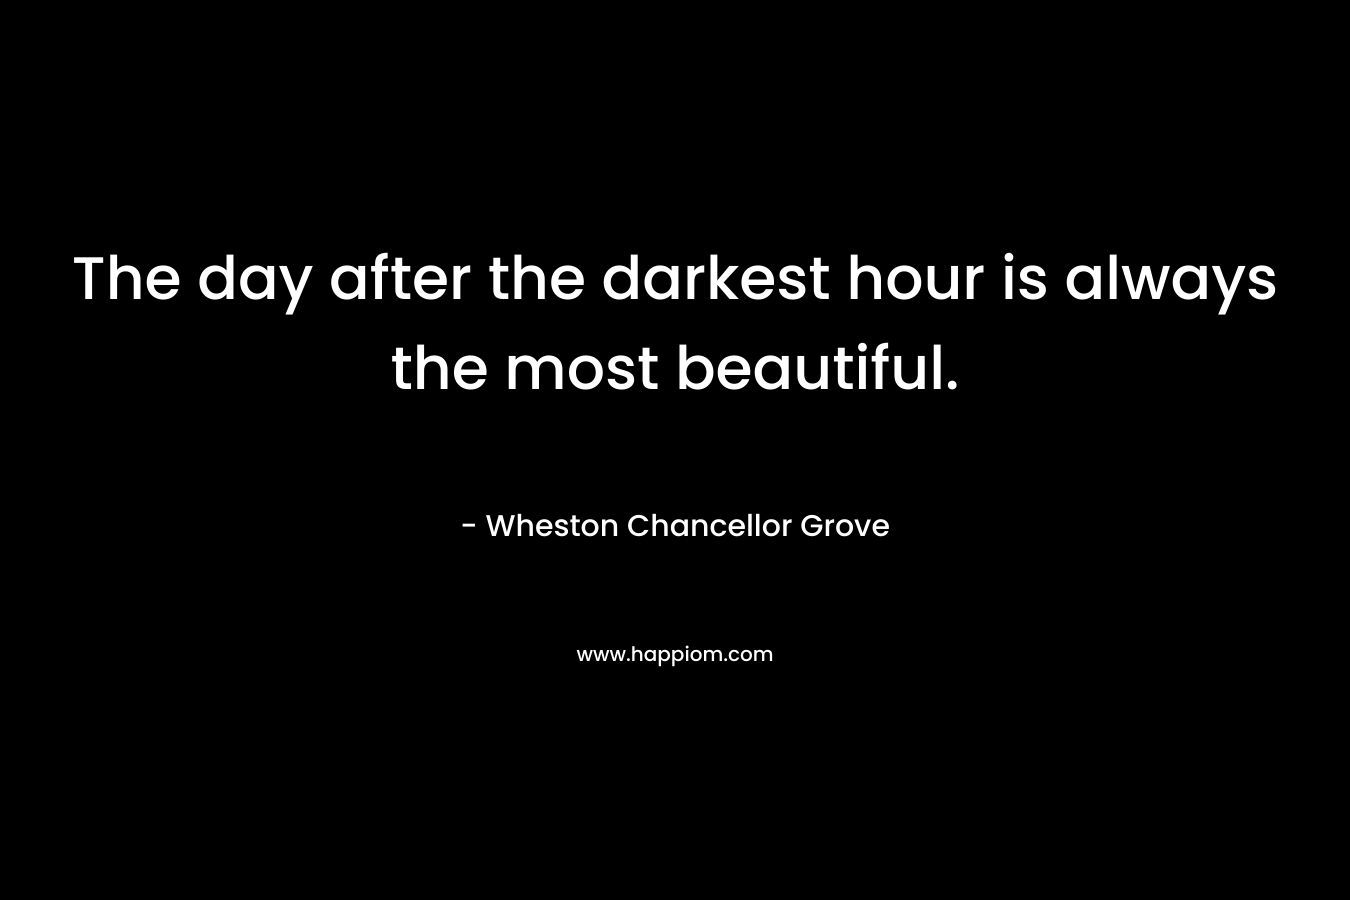 The day after the darkest hour is always the most beautiful.